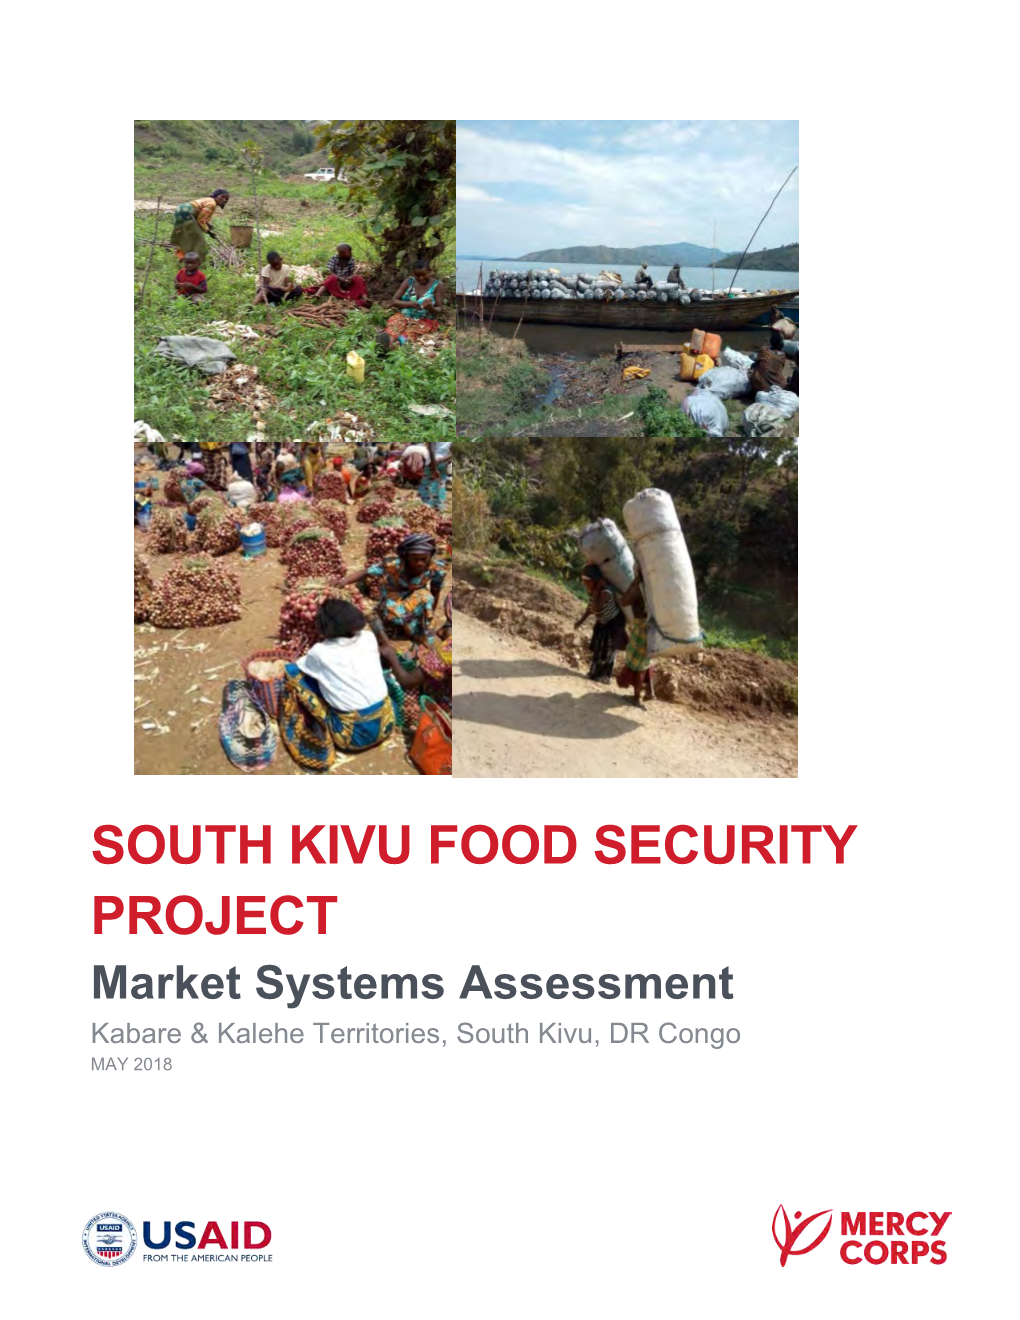 SOUTH KIVU FOOD SECURITY PROJECT Market Systems Assessment Kabare & Kalehe Territories, South Kivu, DR Congo MAY 2018